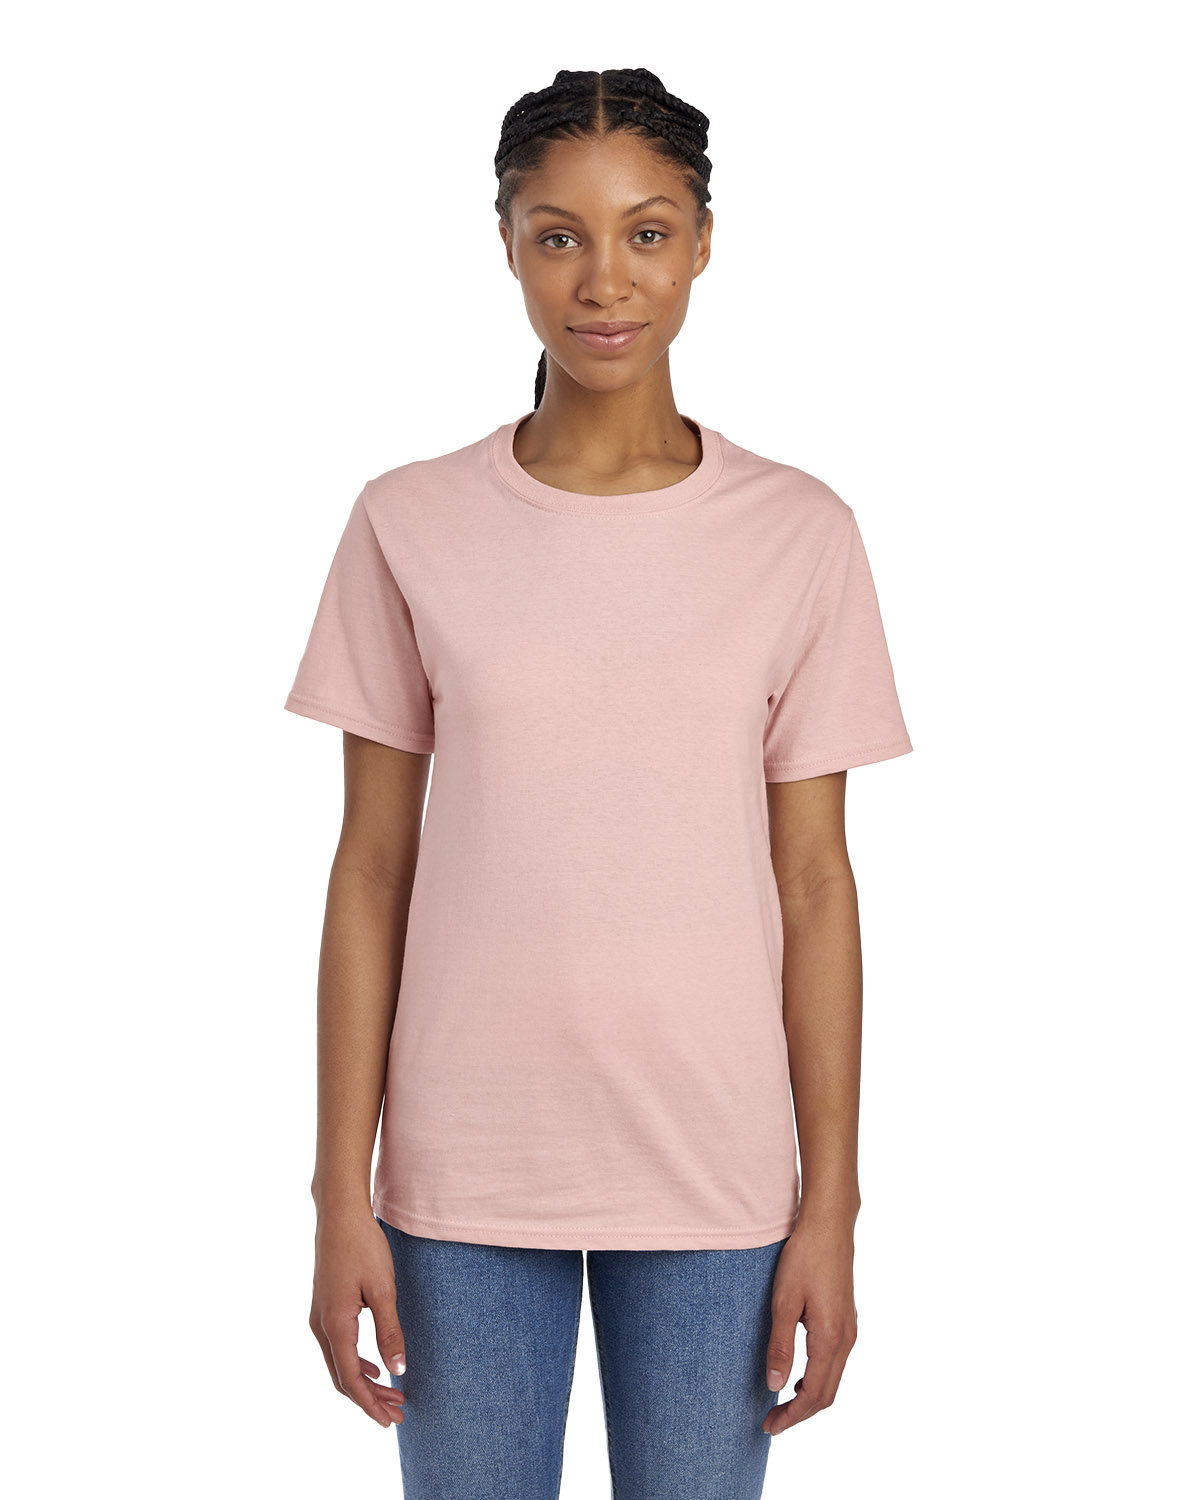 Fruit of the Loom Adult HD Cotton™ T-Shirt BLUSH PINK 